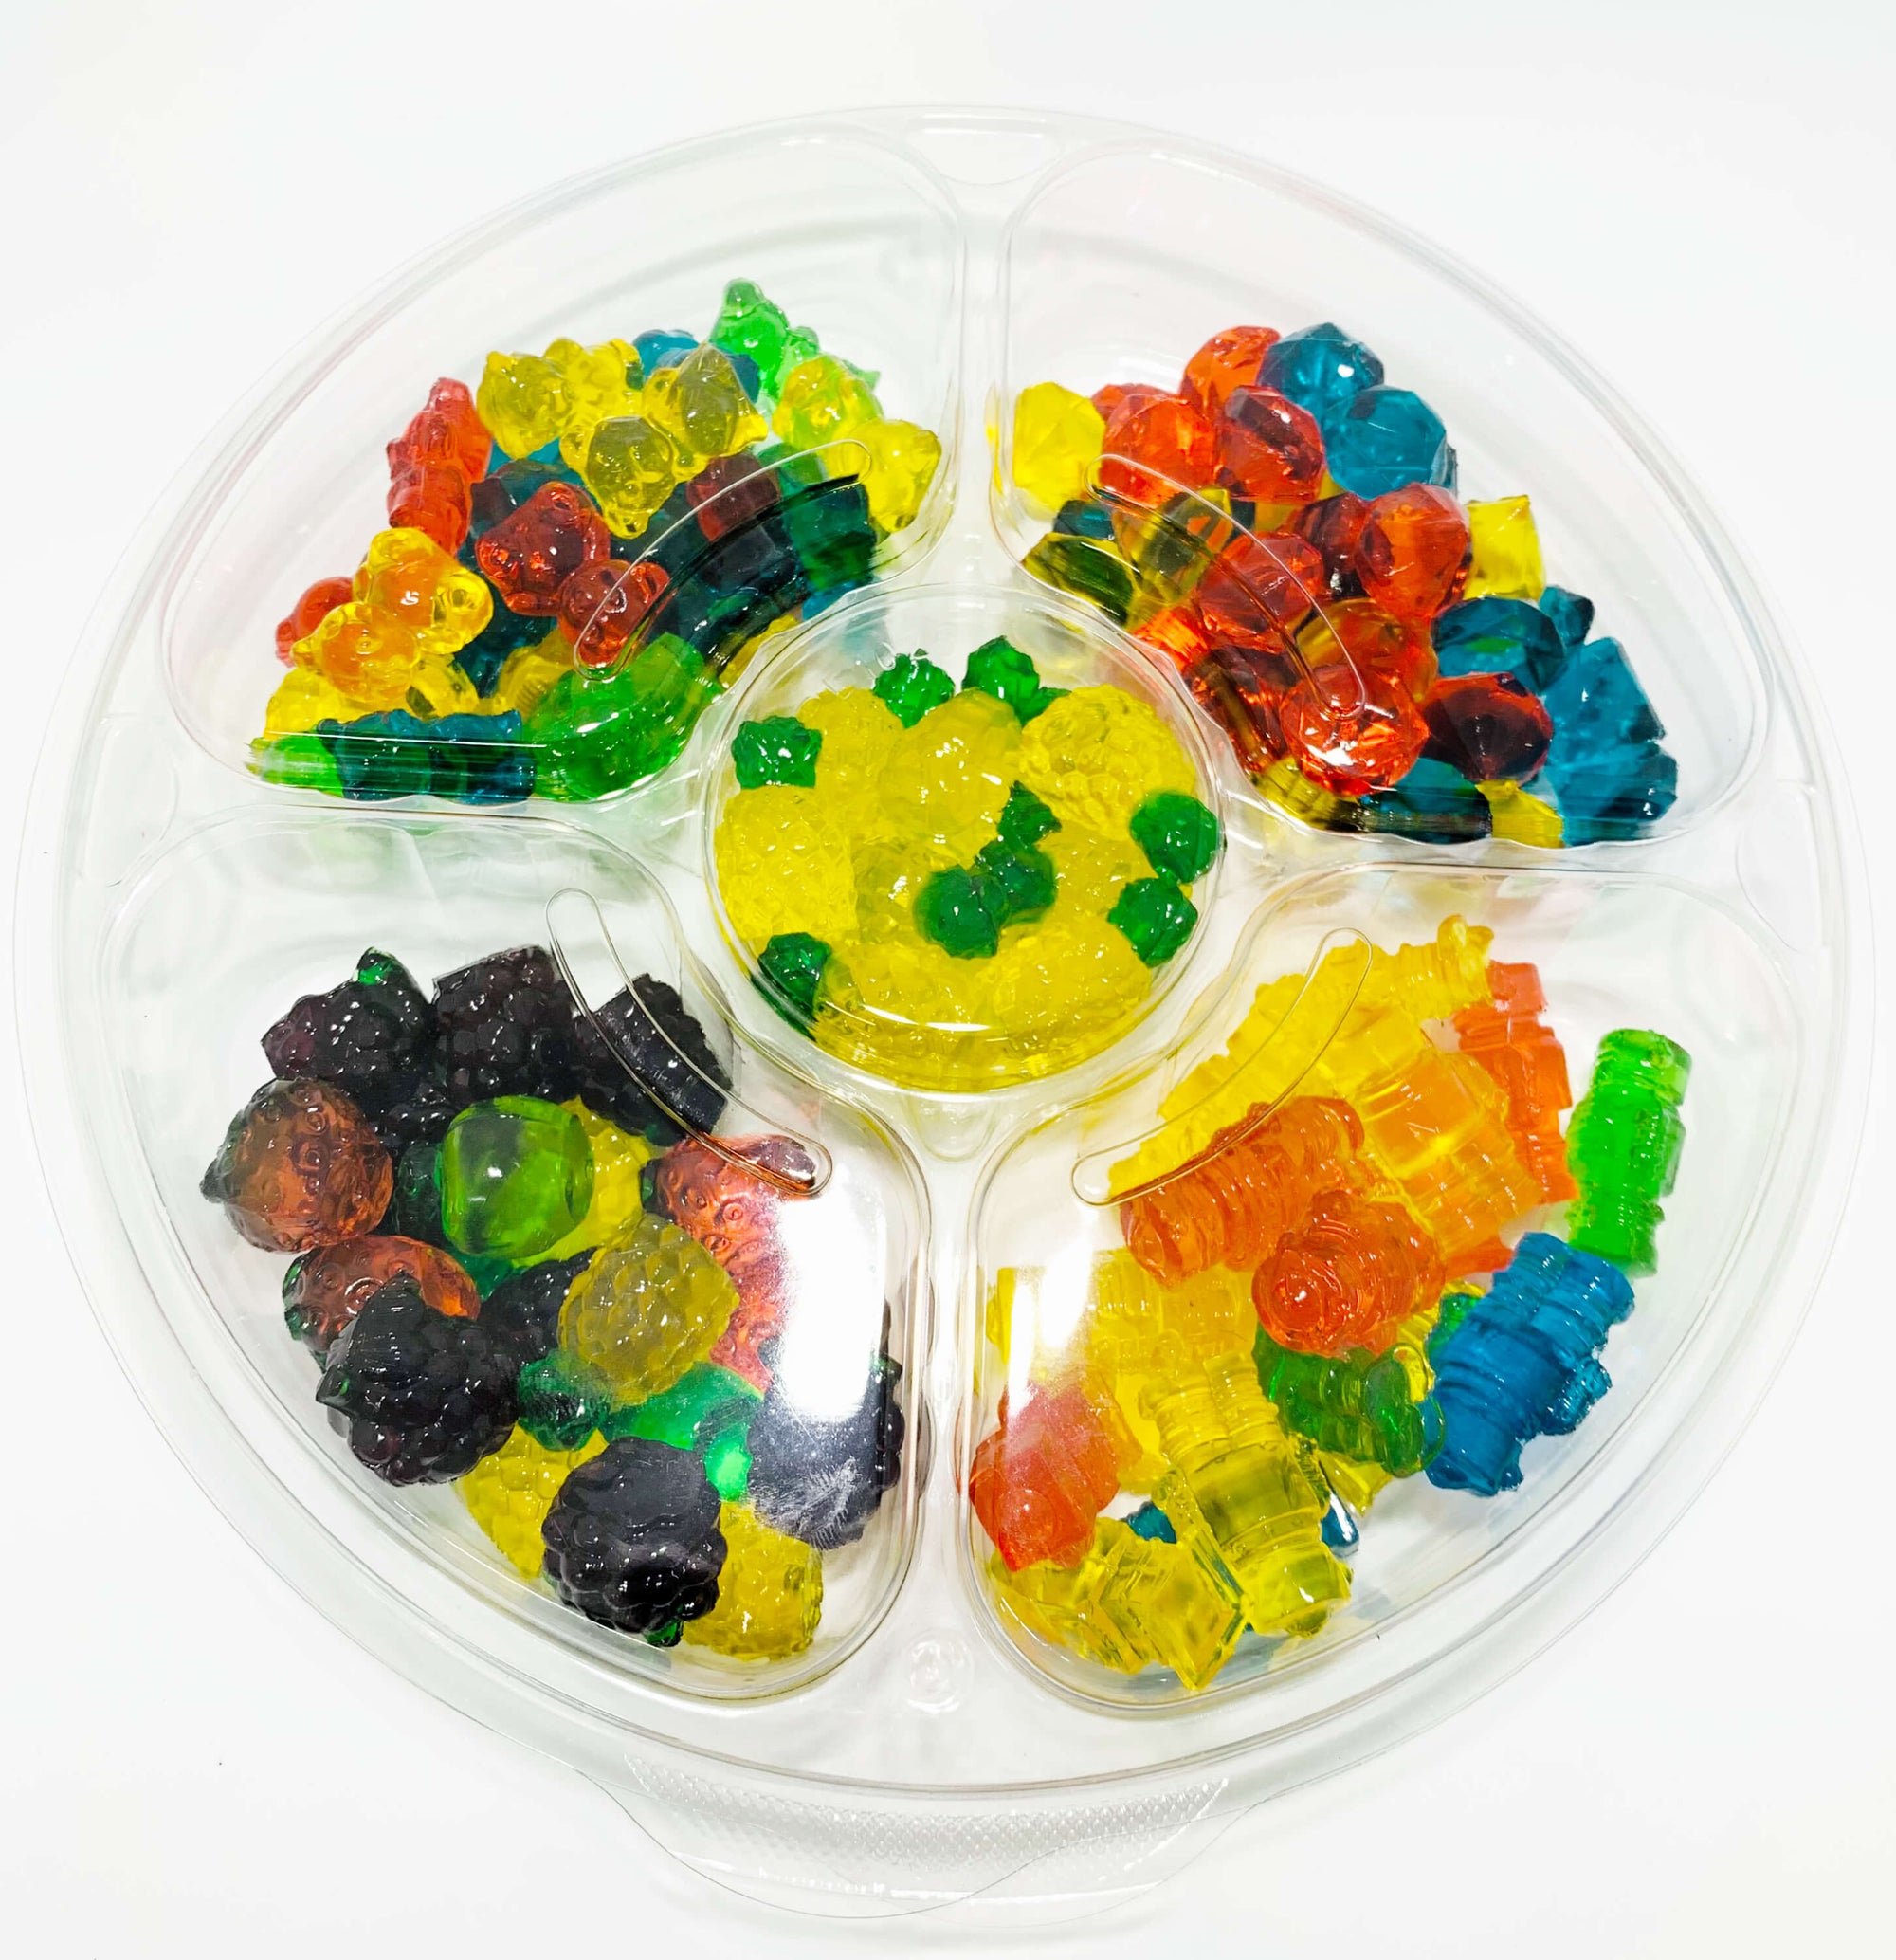 ABC Stores - Gummy some candies! We have the 3D gummy